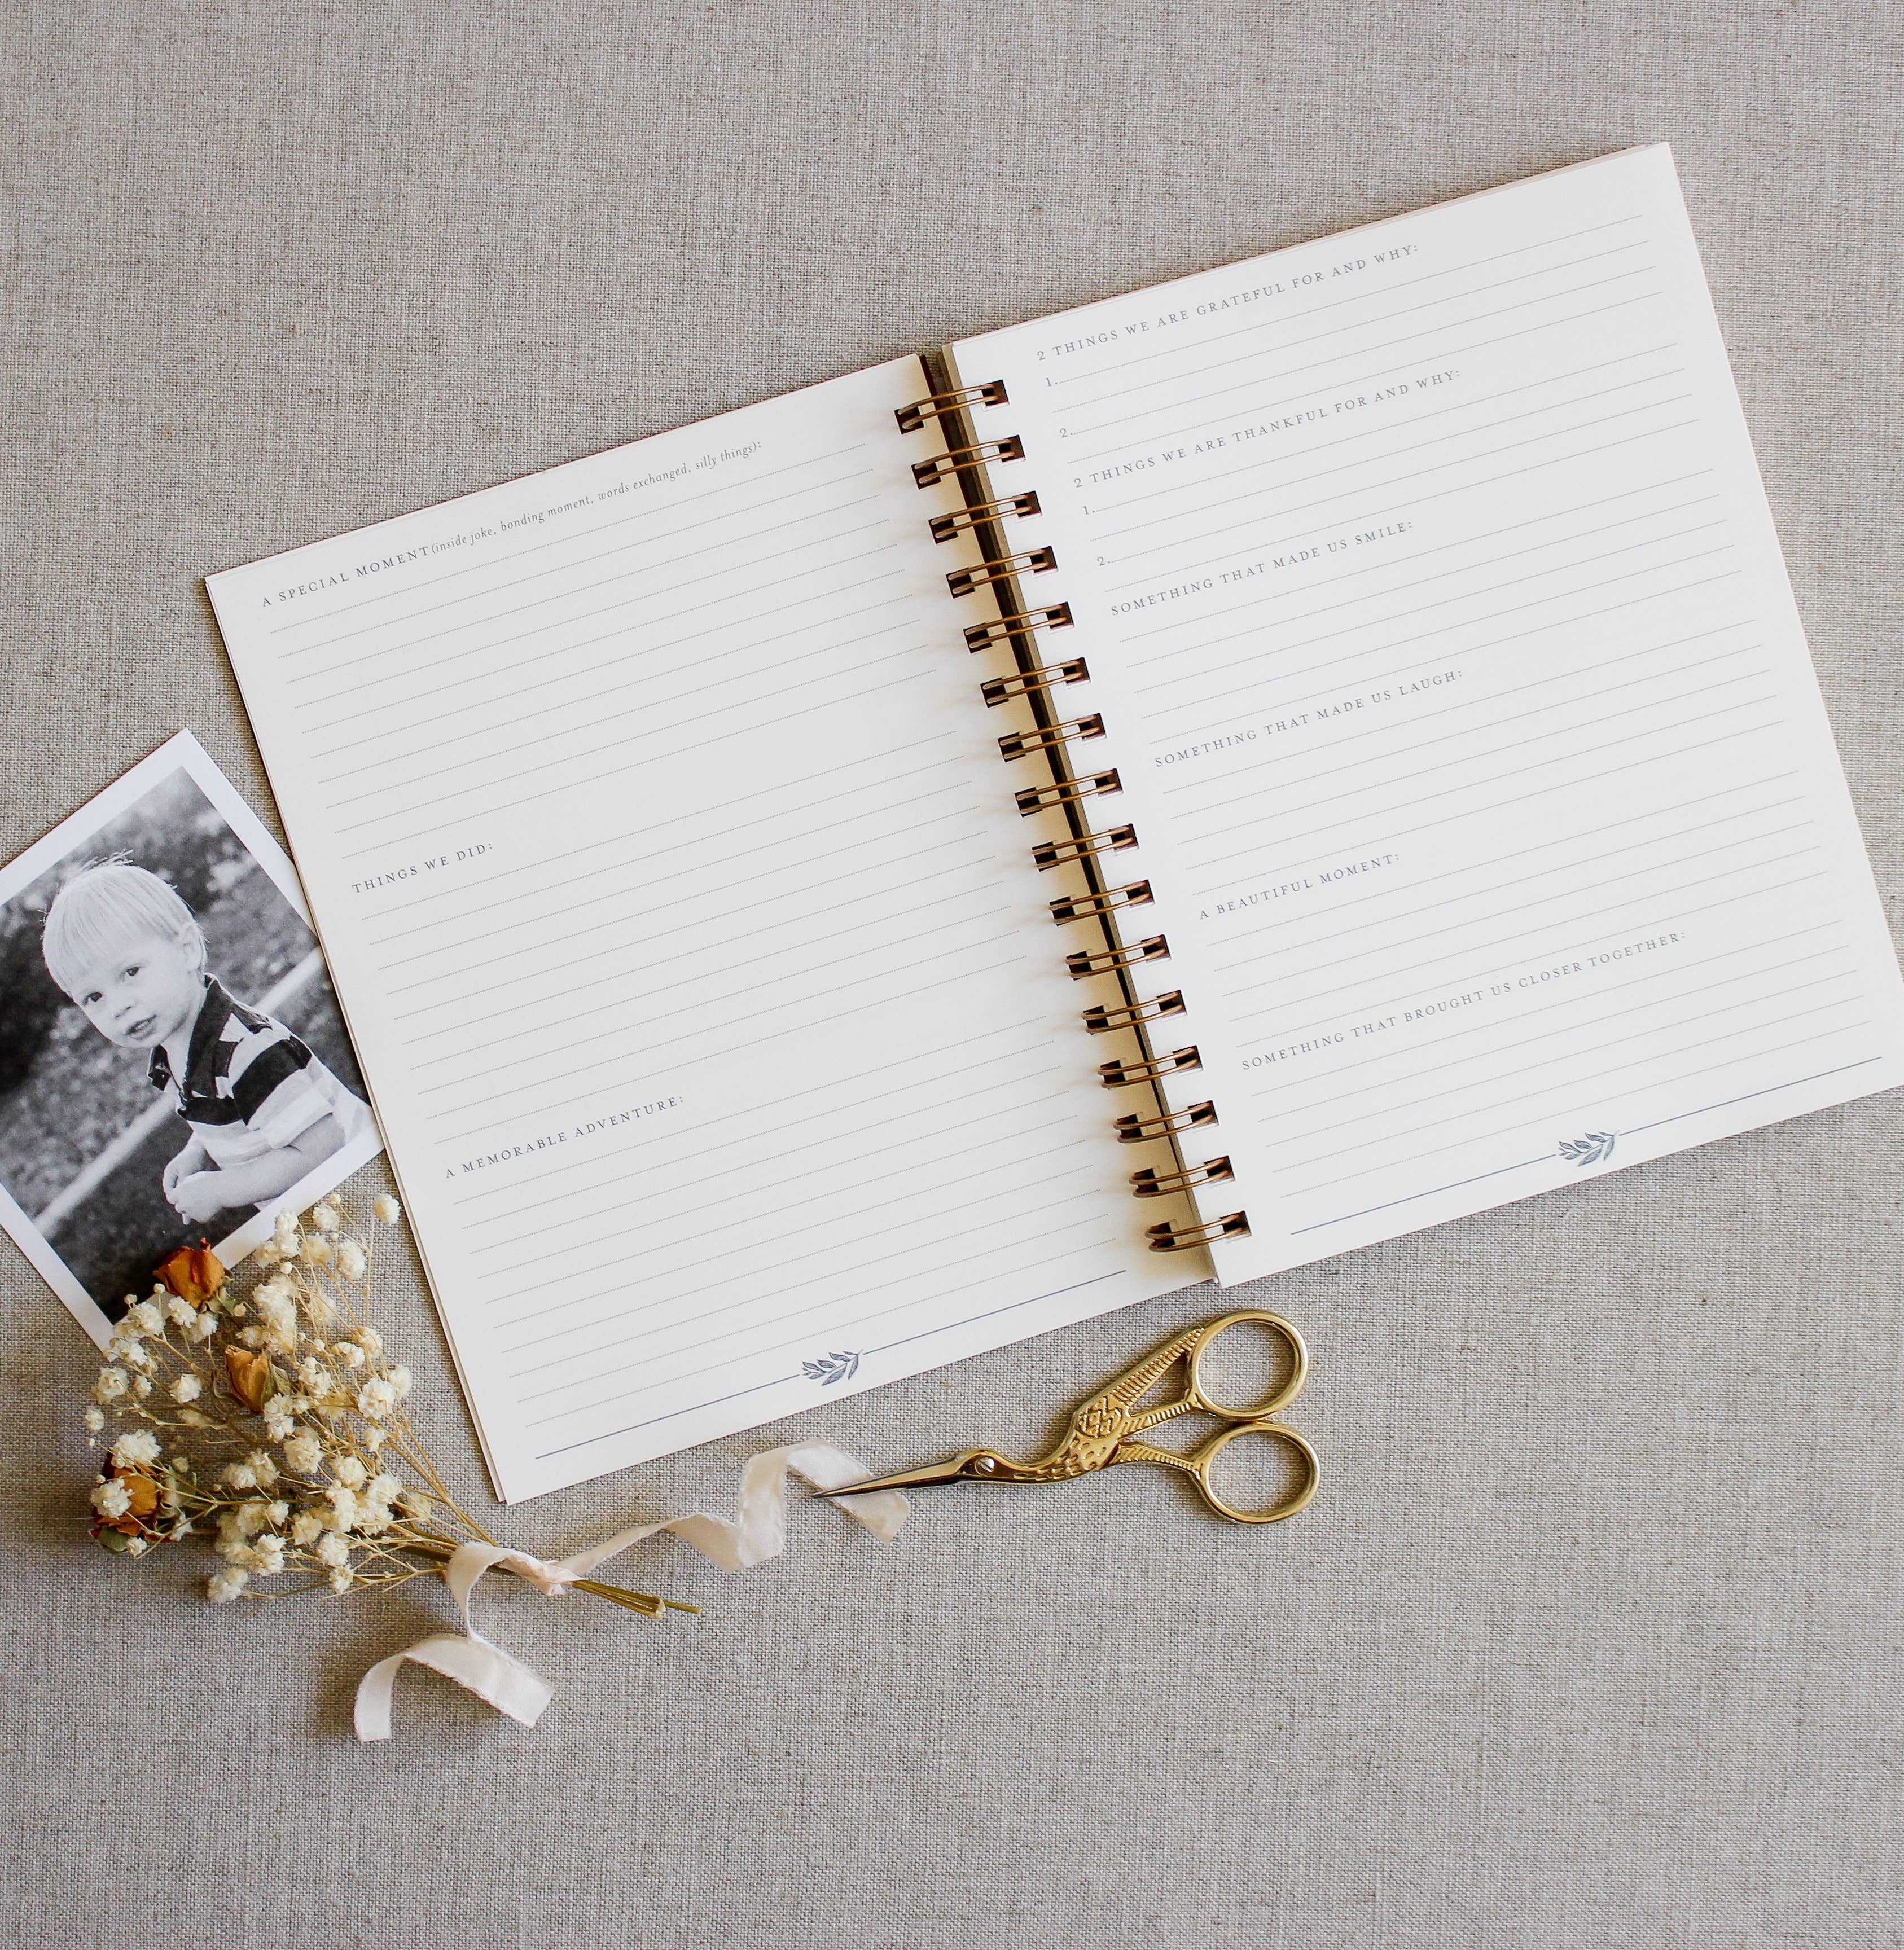 The Little Book of Us Family Memory Journal